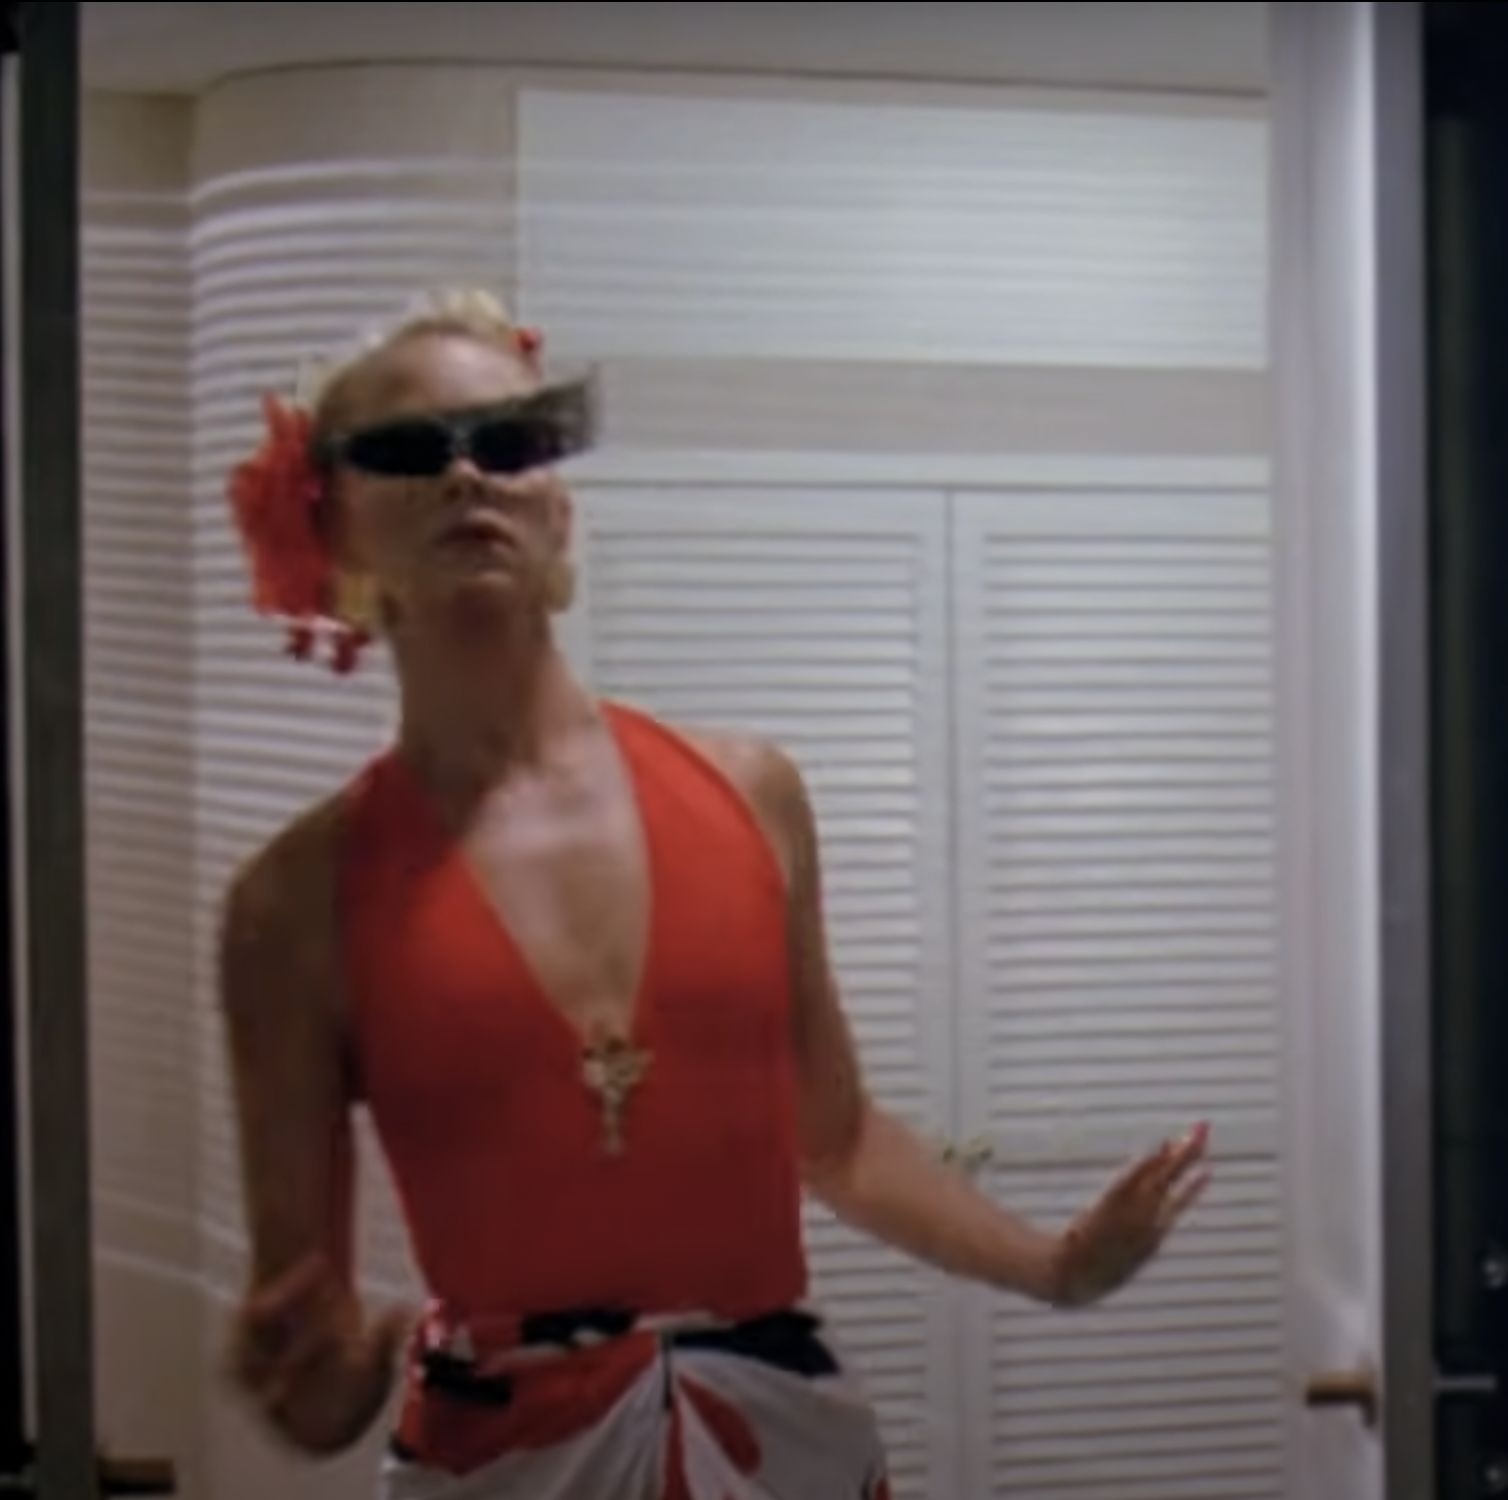 Goldie Hawn in "Overboard" in1987 | Source: Youtube.com/Rotten Tomatoes Classic Trailers